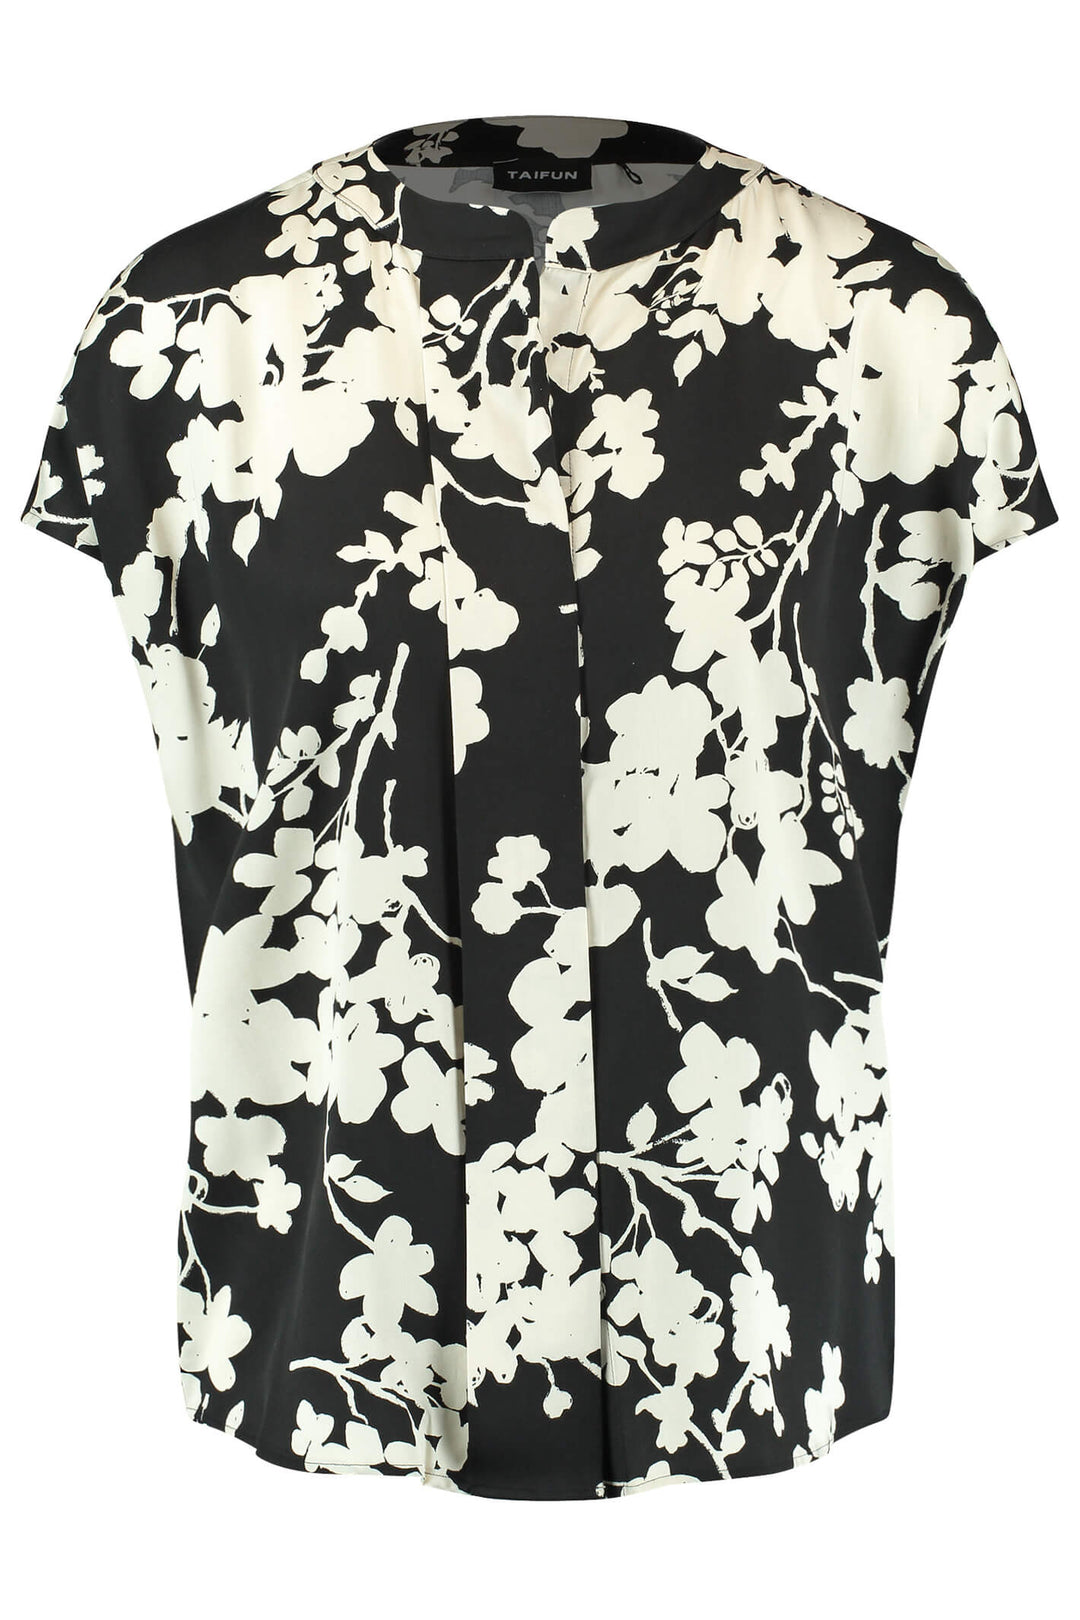 Taifun 360317 Black Blossom Patterned Blouse - Experience Boutique